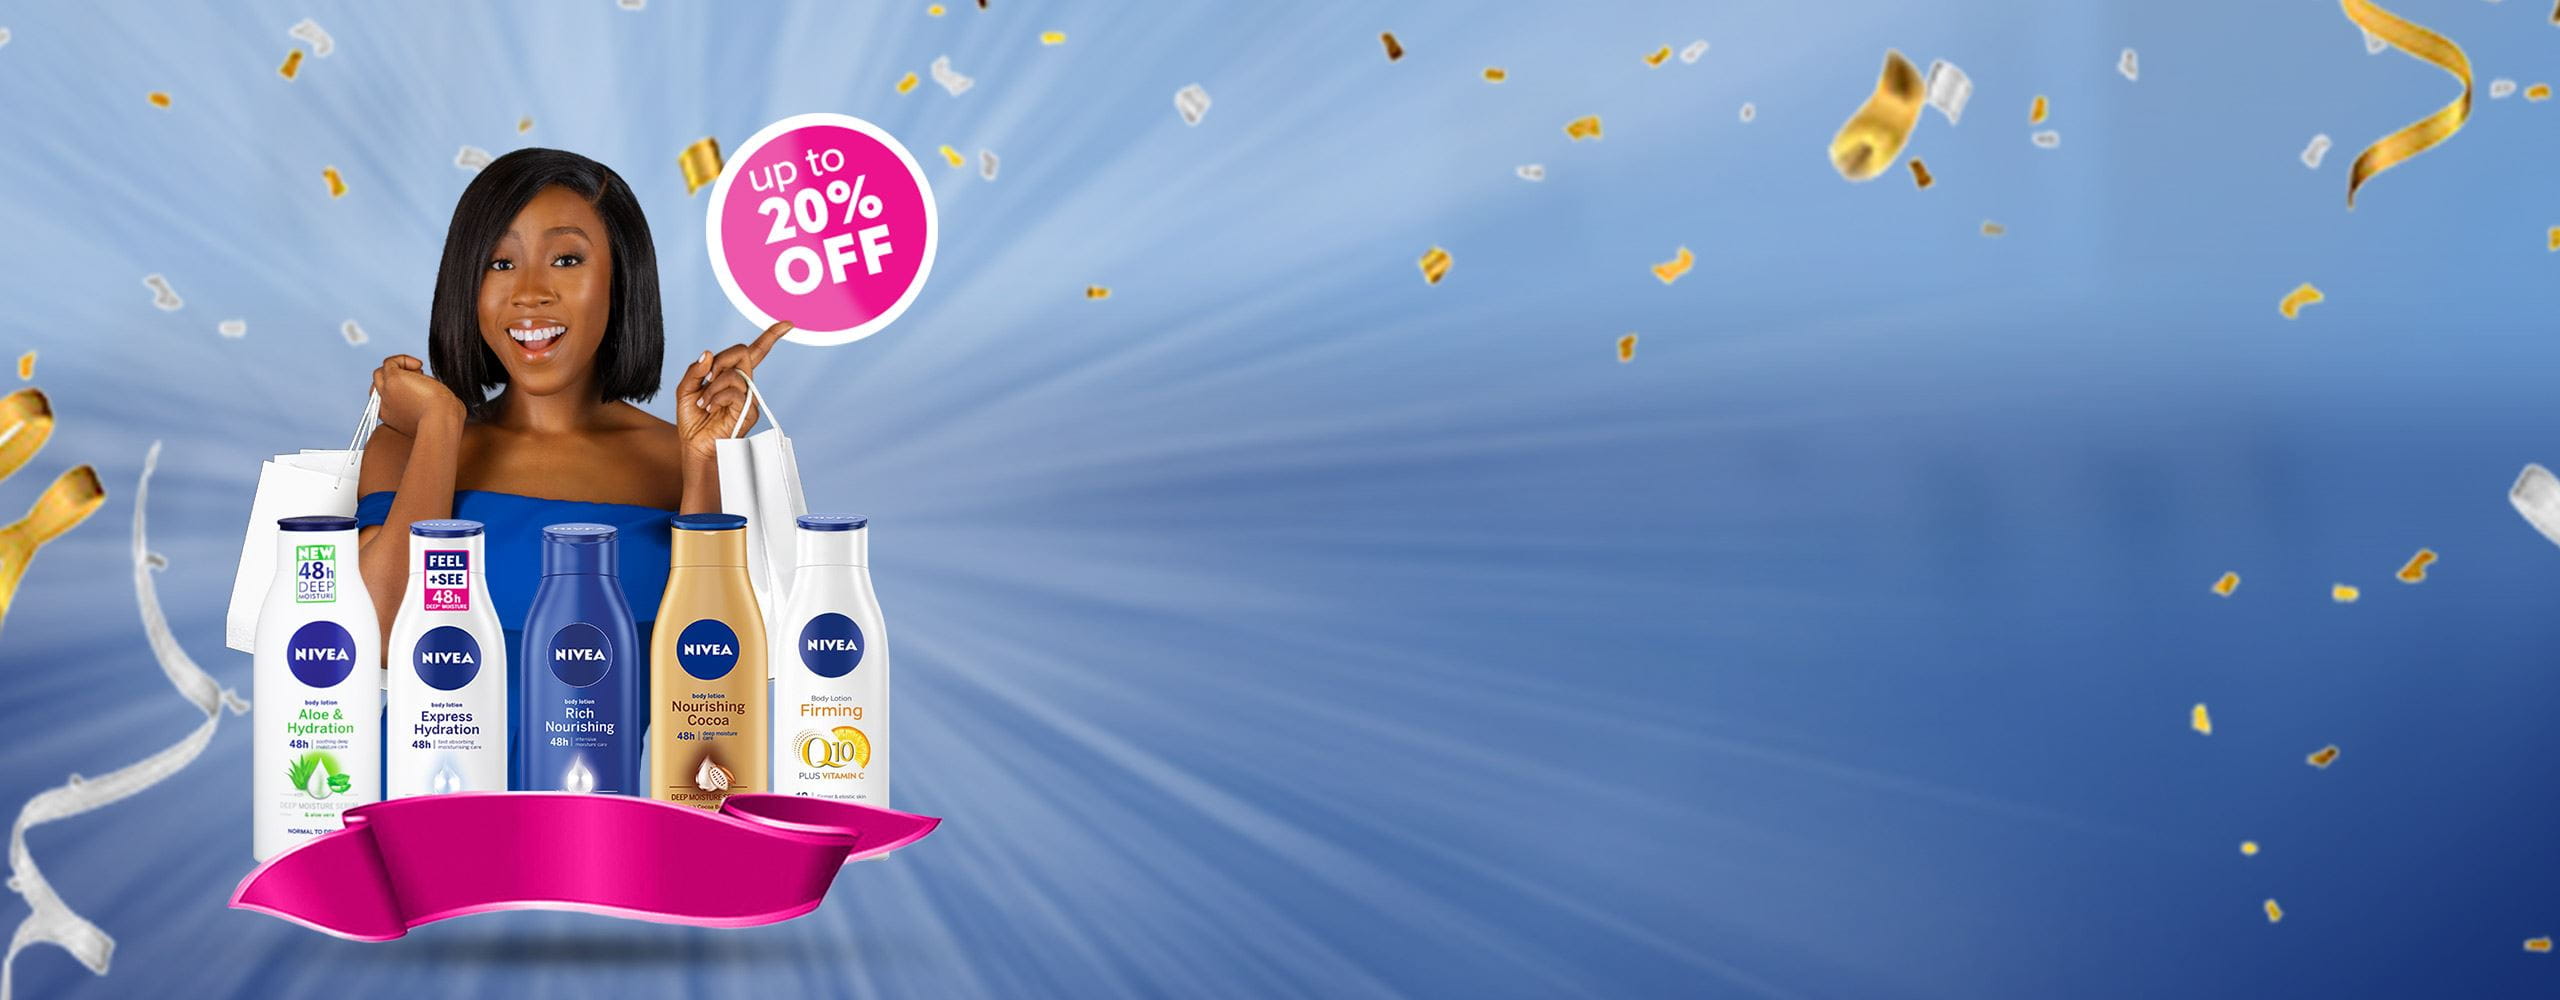 20% off! Beauty Month - #MyPowerWithNIVEA